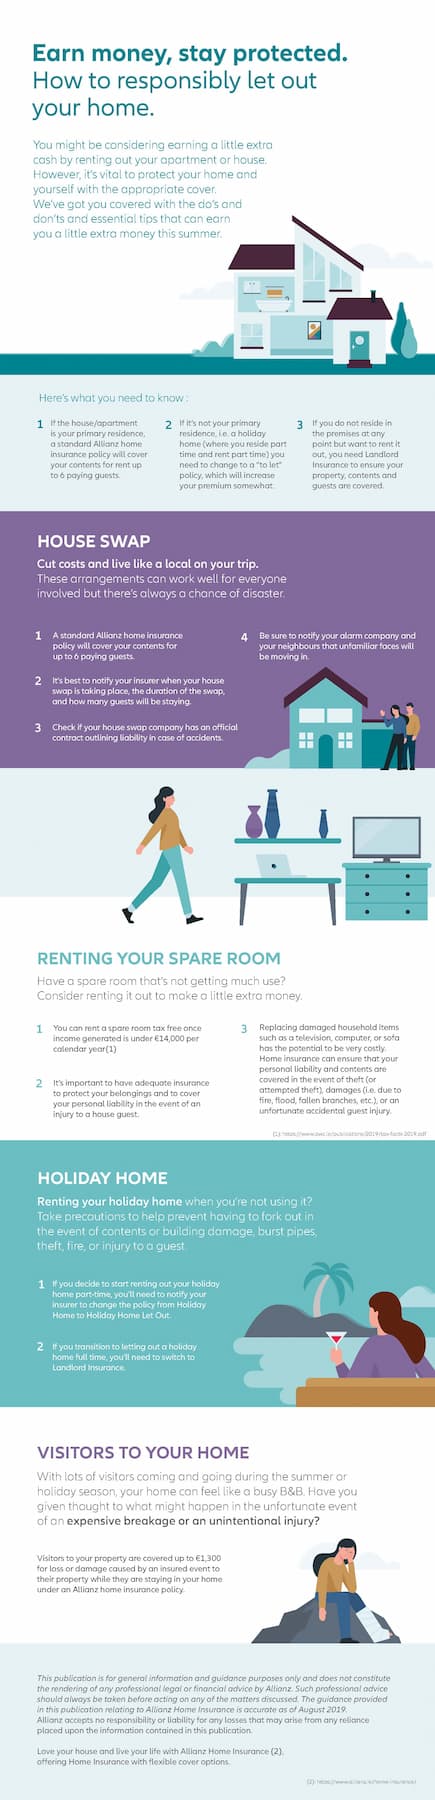 poster with tips about earning money on renting out your home